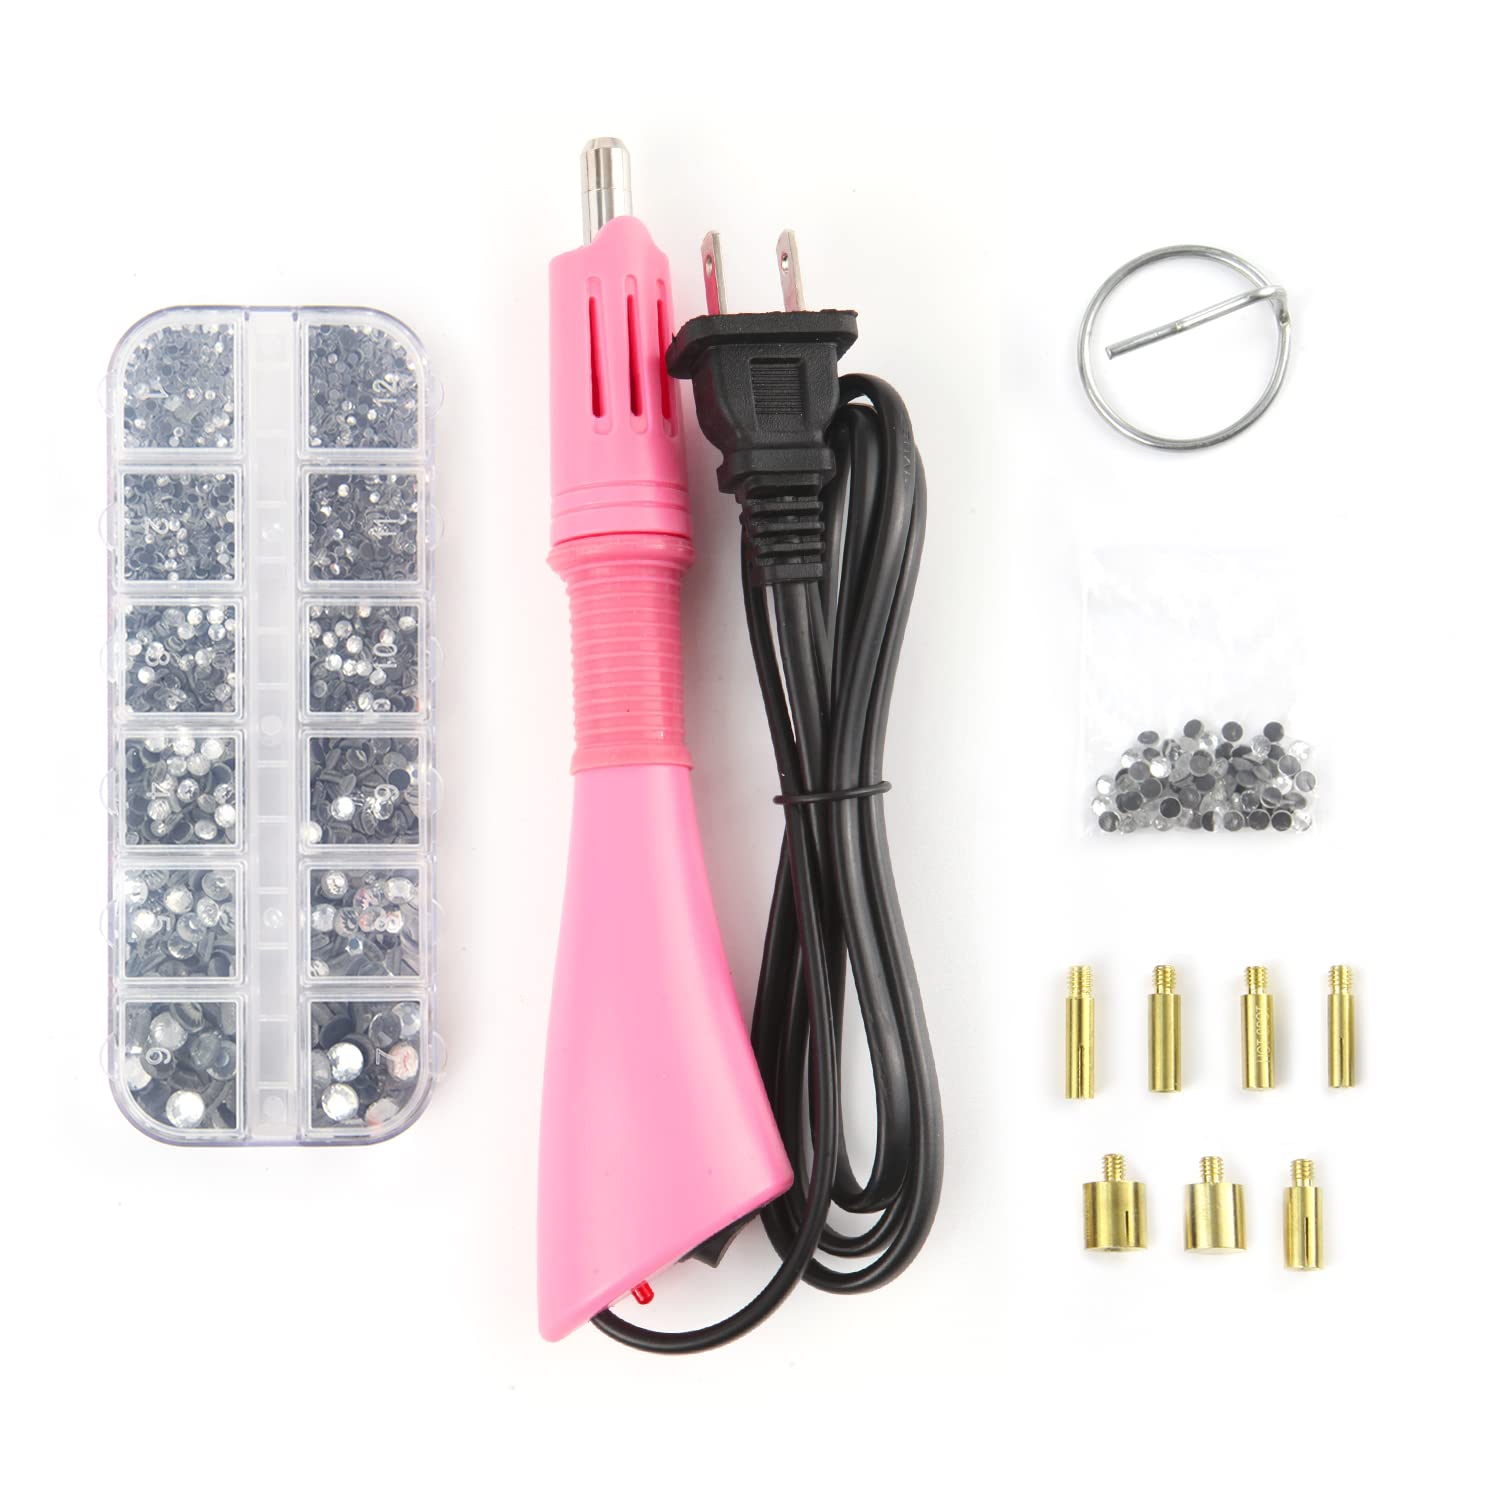 Hot Fix Applicator Tool Kits for Dress, Bag, Shoes, Bedazzler Kit